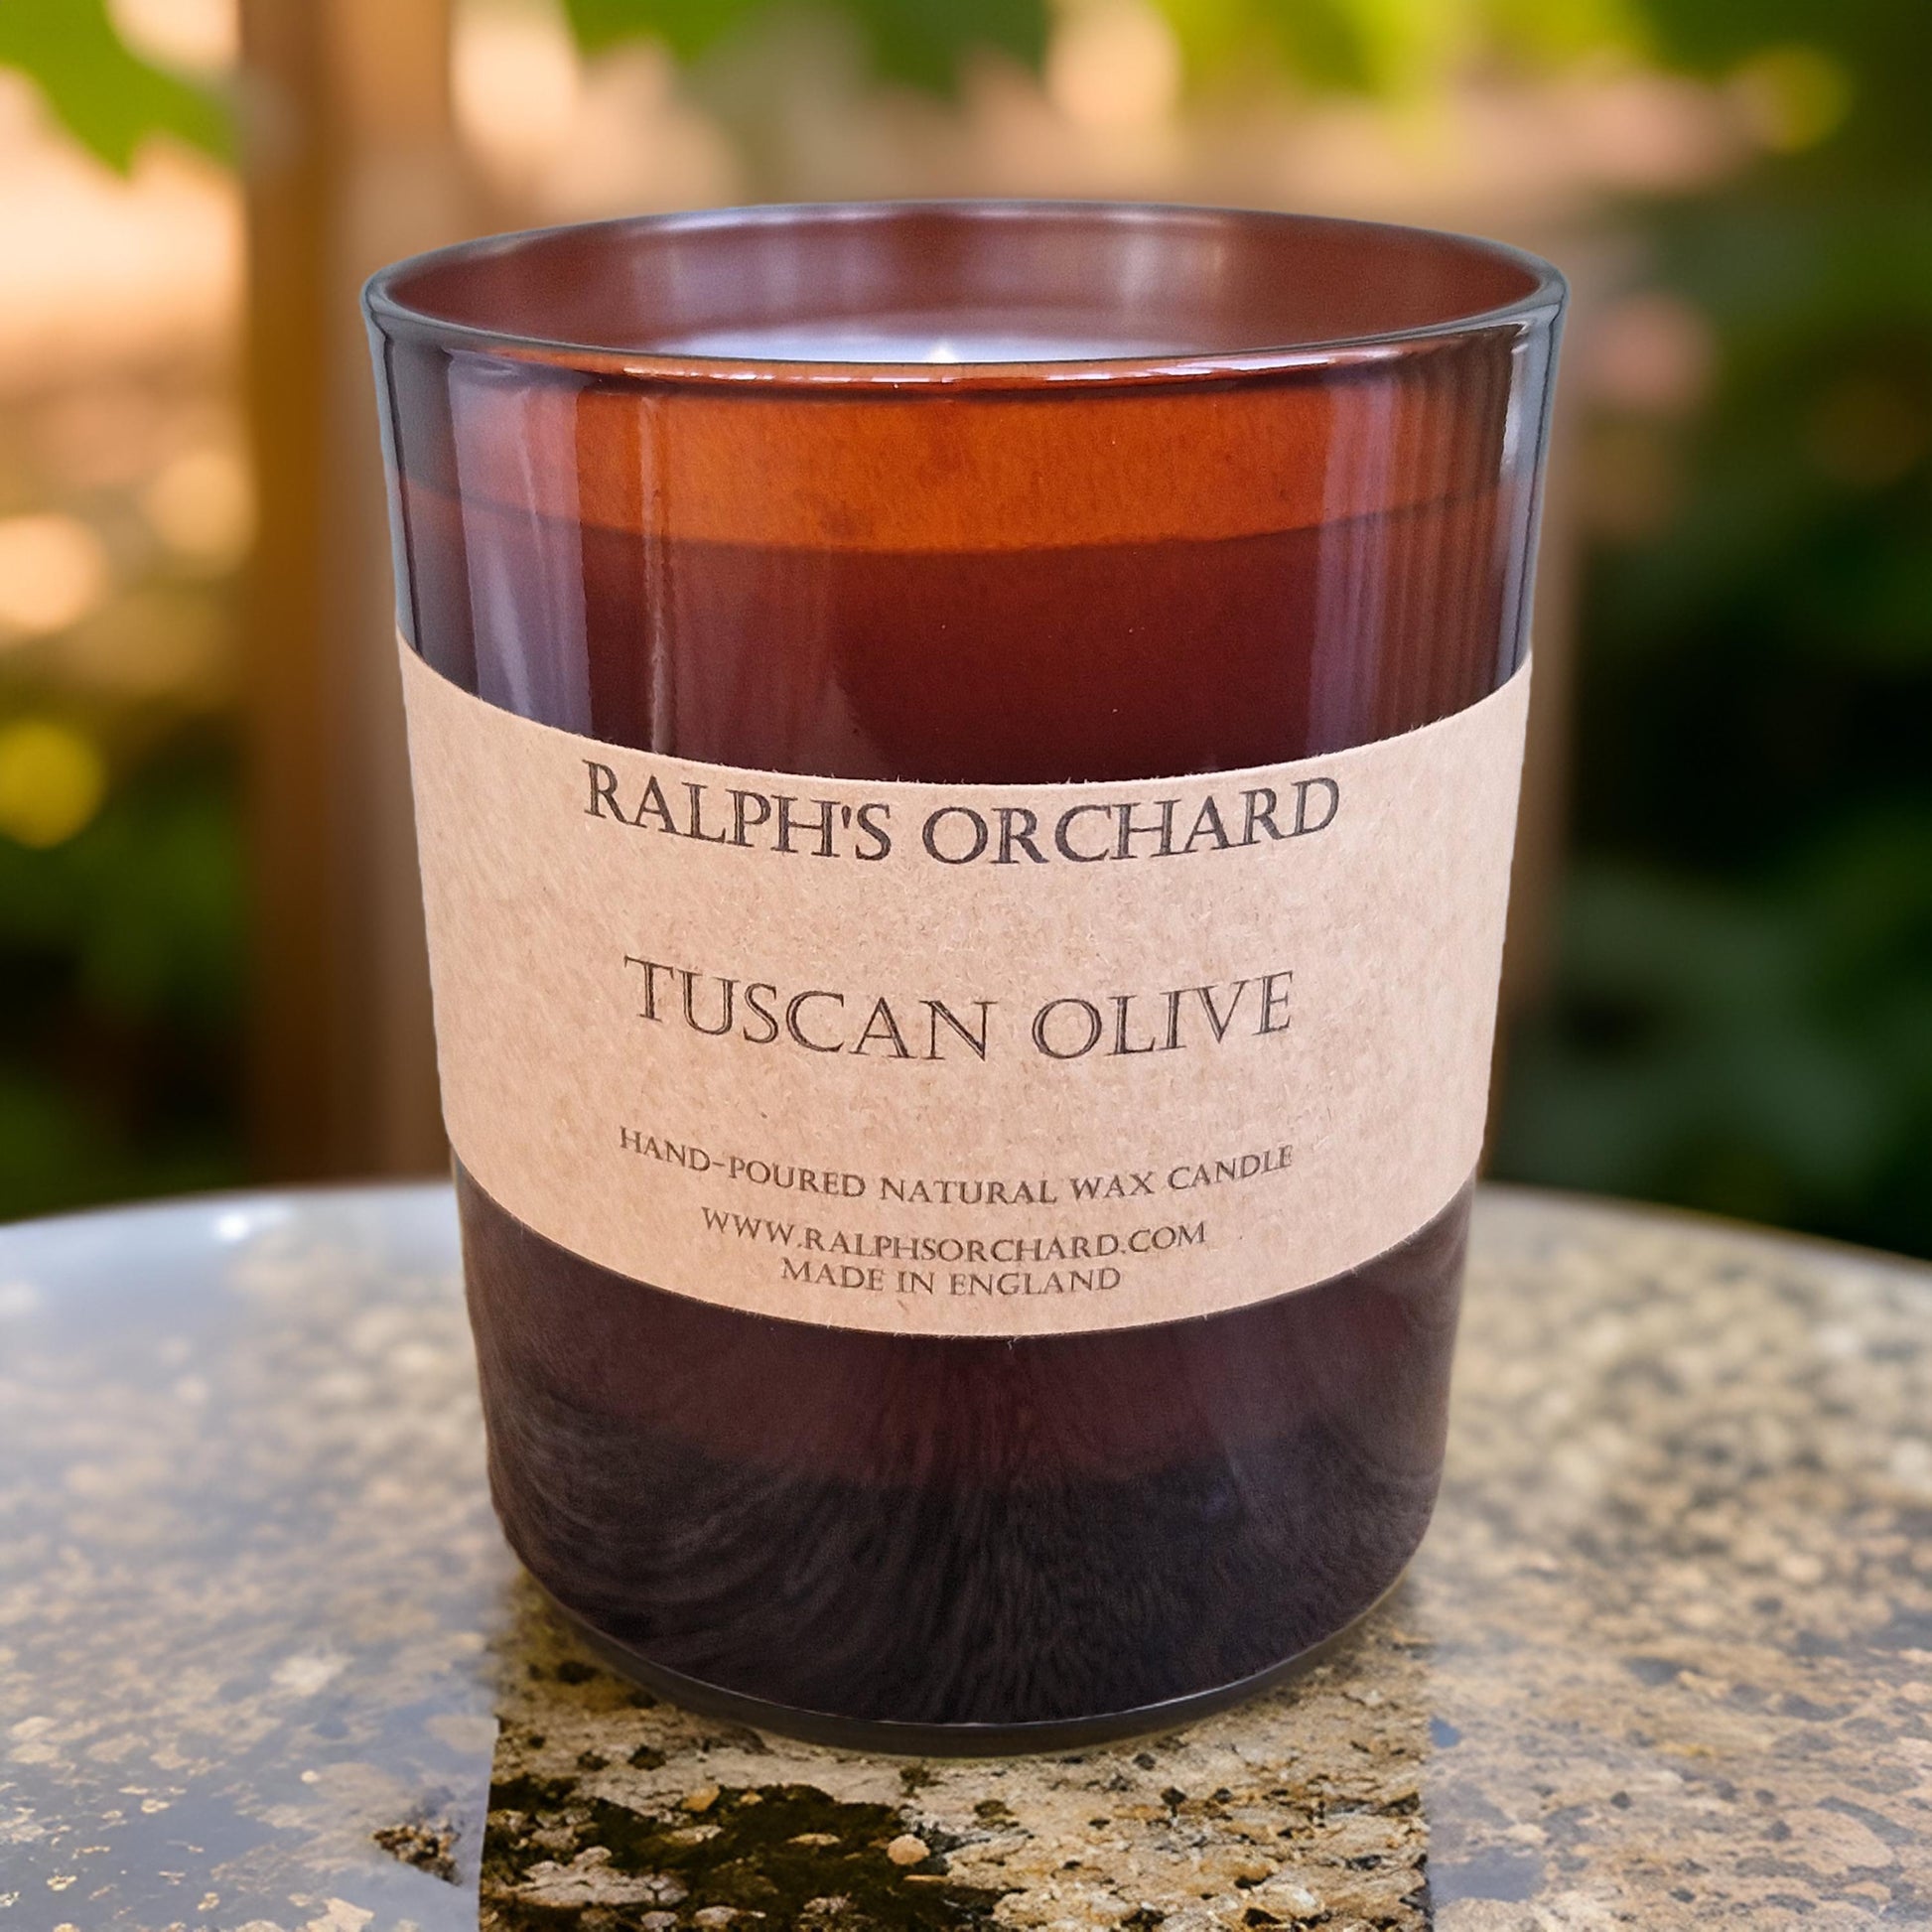 Tuscan olive scented soy candle